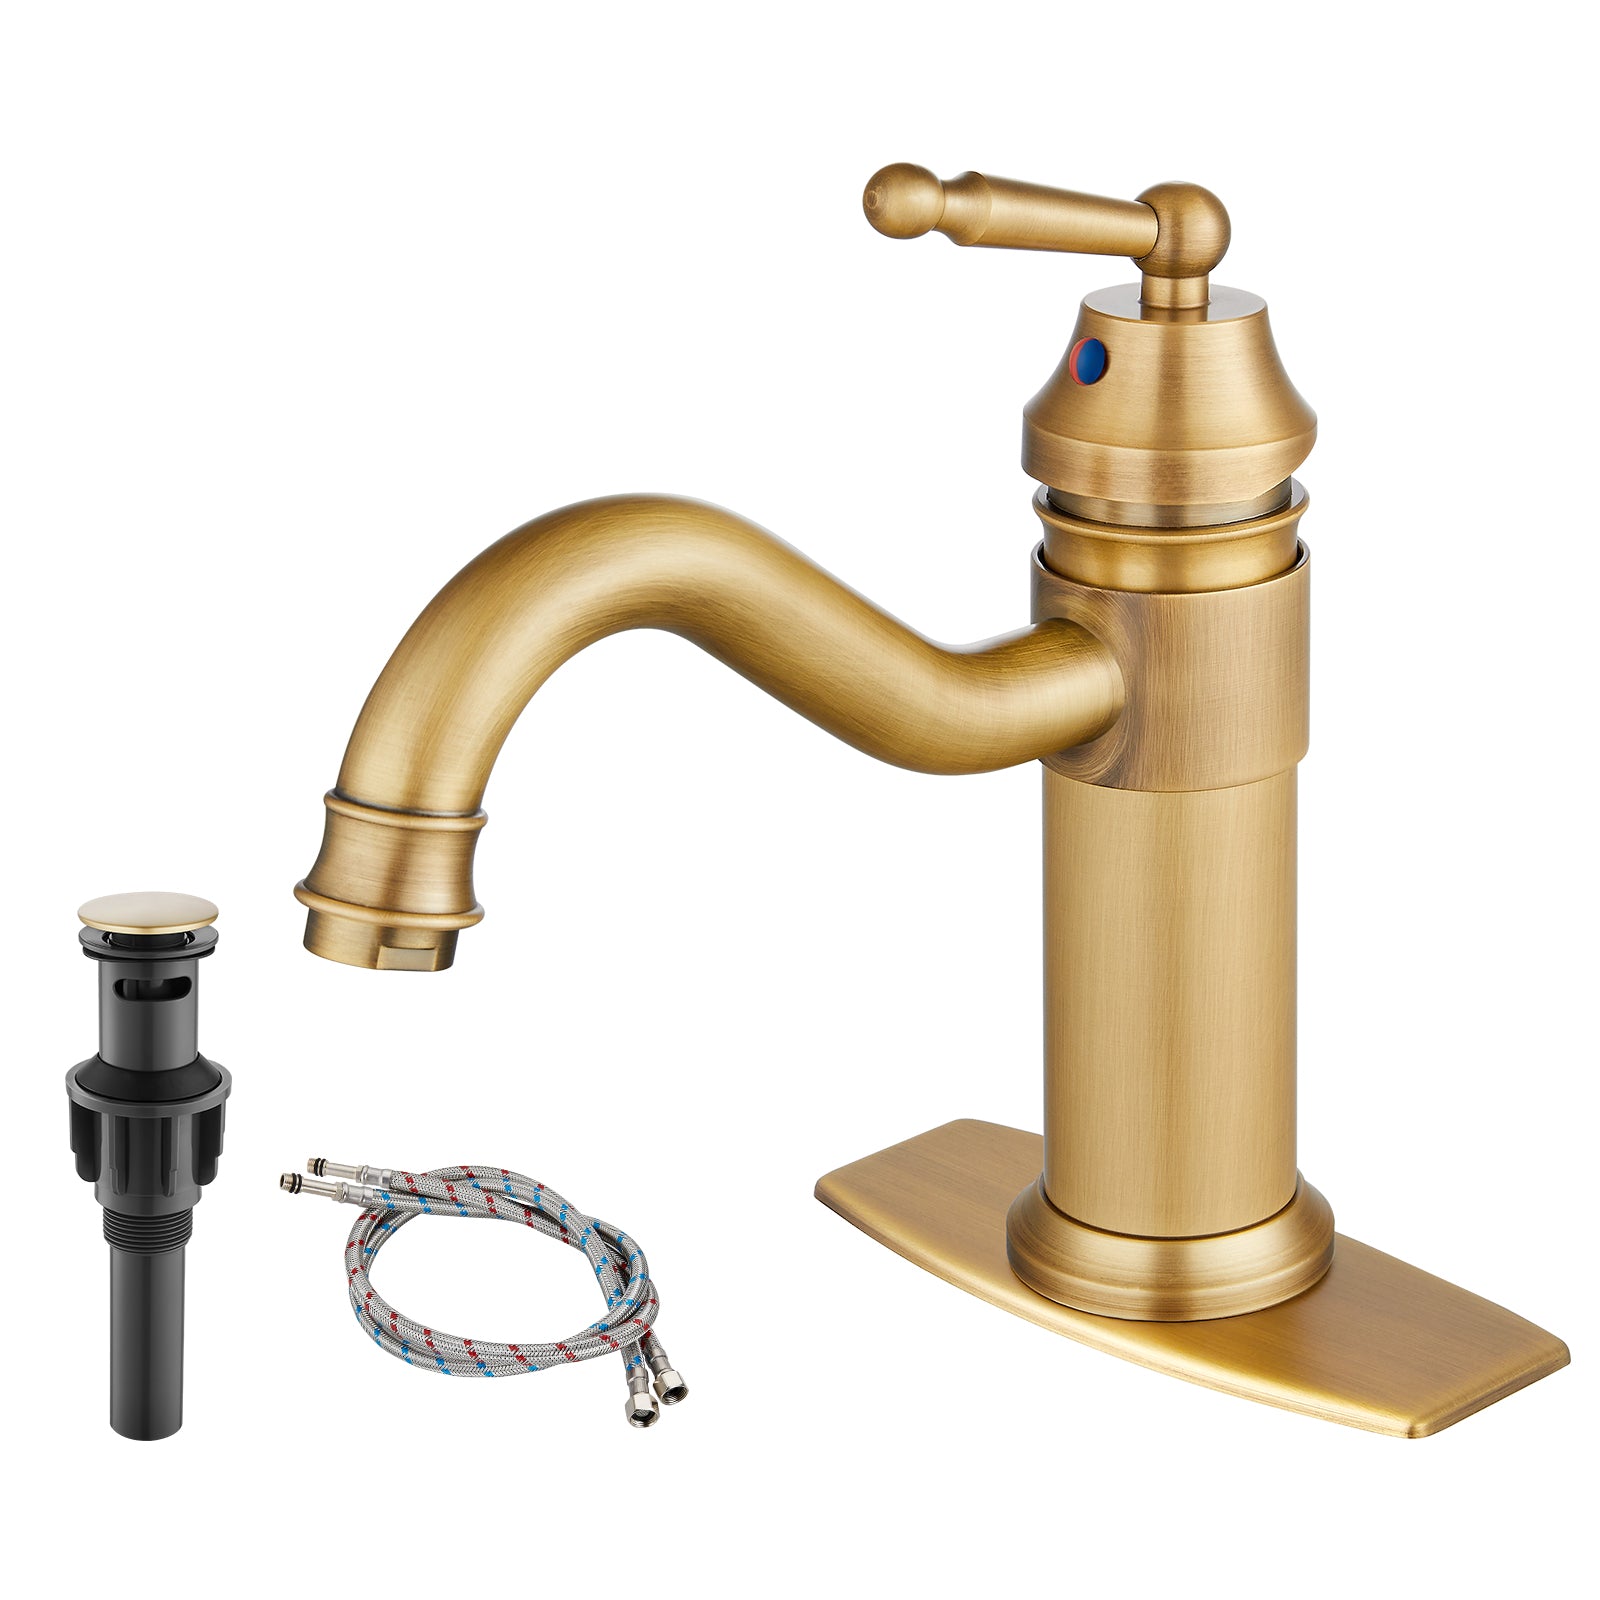 Heyalan Bathroom Sink Faucet  Deck Mount Single Hole One Handle Lavatory Assembly Brass Vanity Basin Mixer Tap Pop Up Drain Included Hot and Cold Water